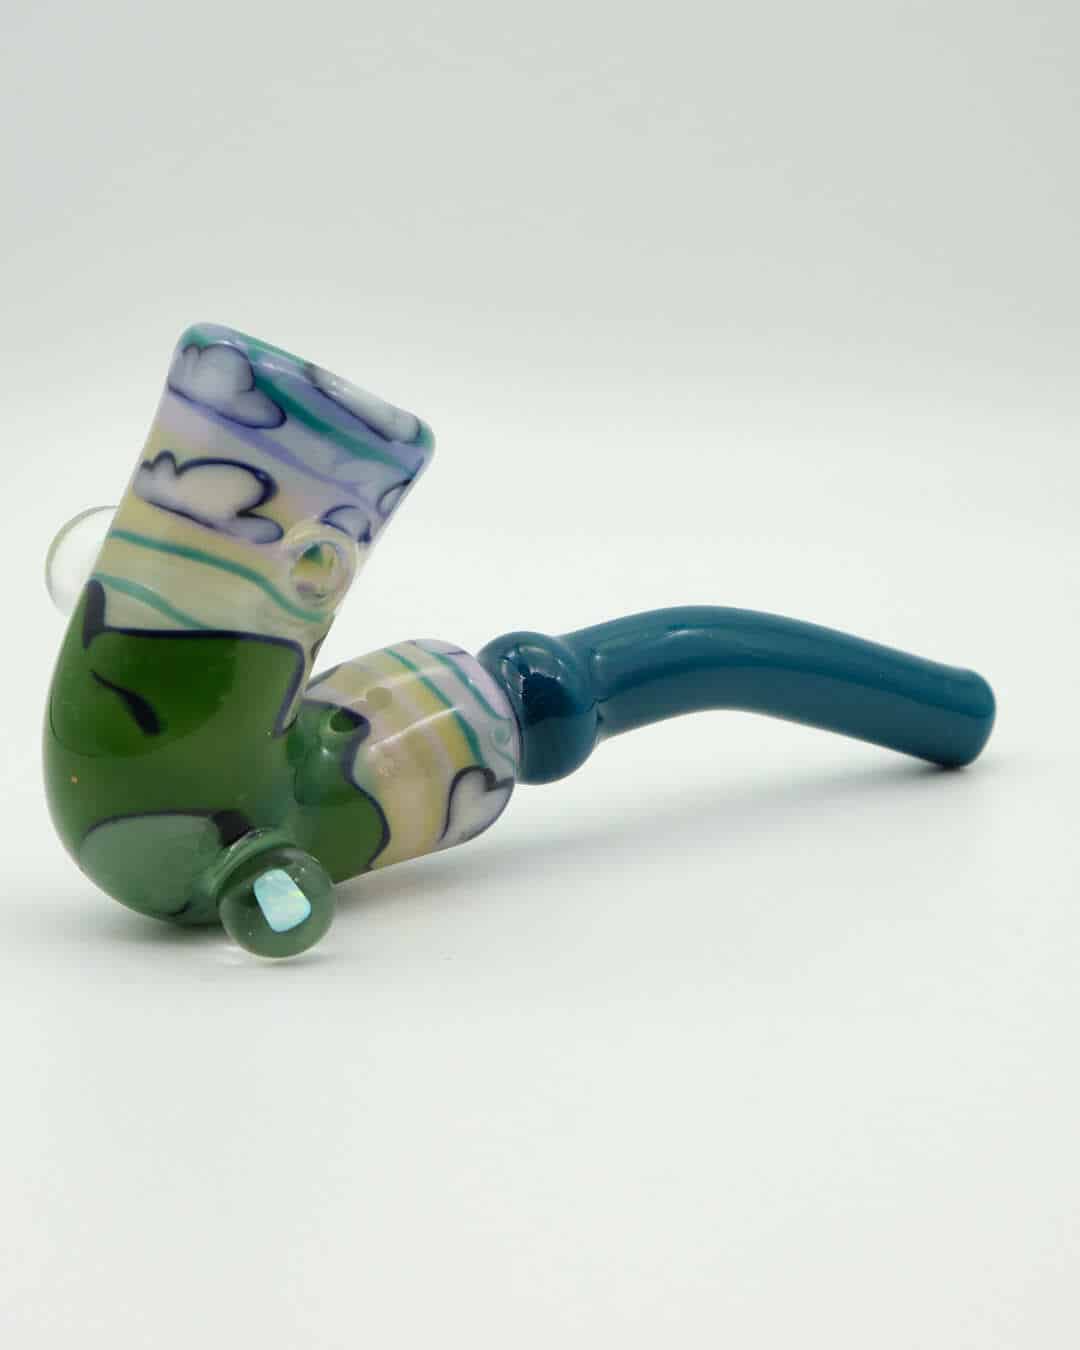 luxurious design of the Sherlock Pipe by Gnarla Carla